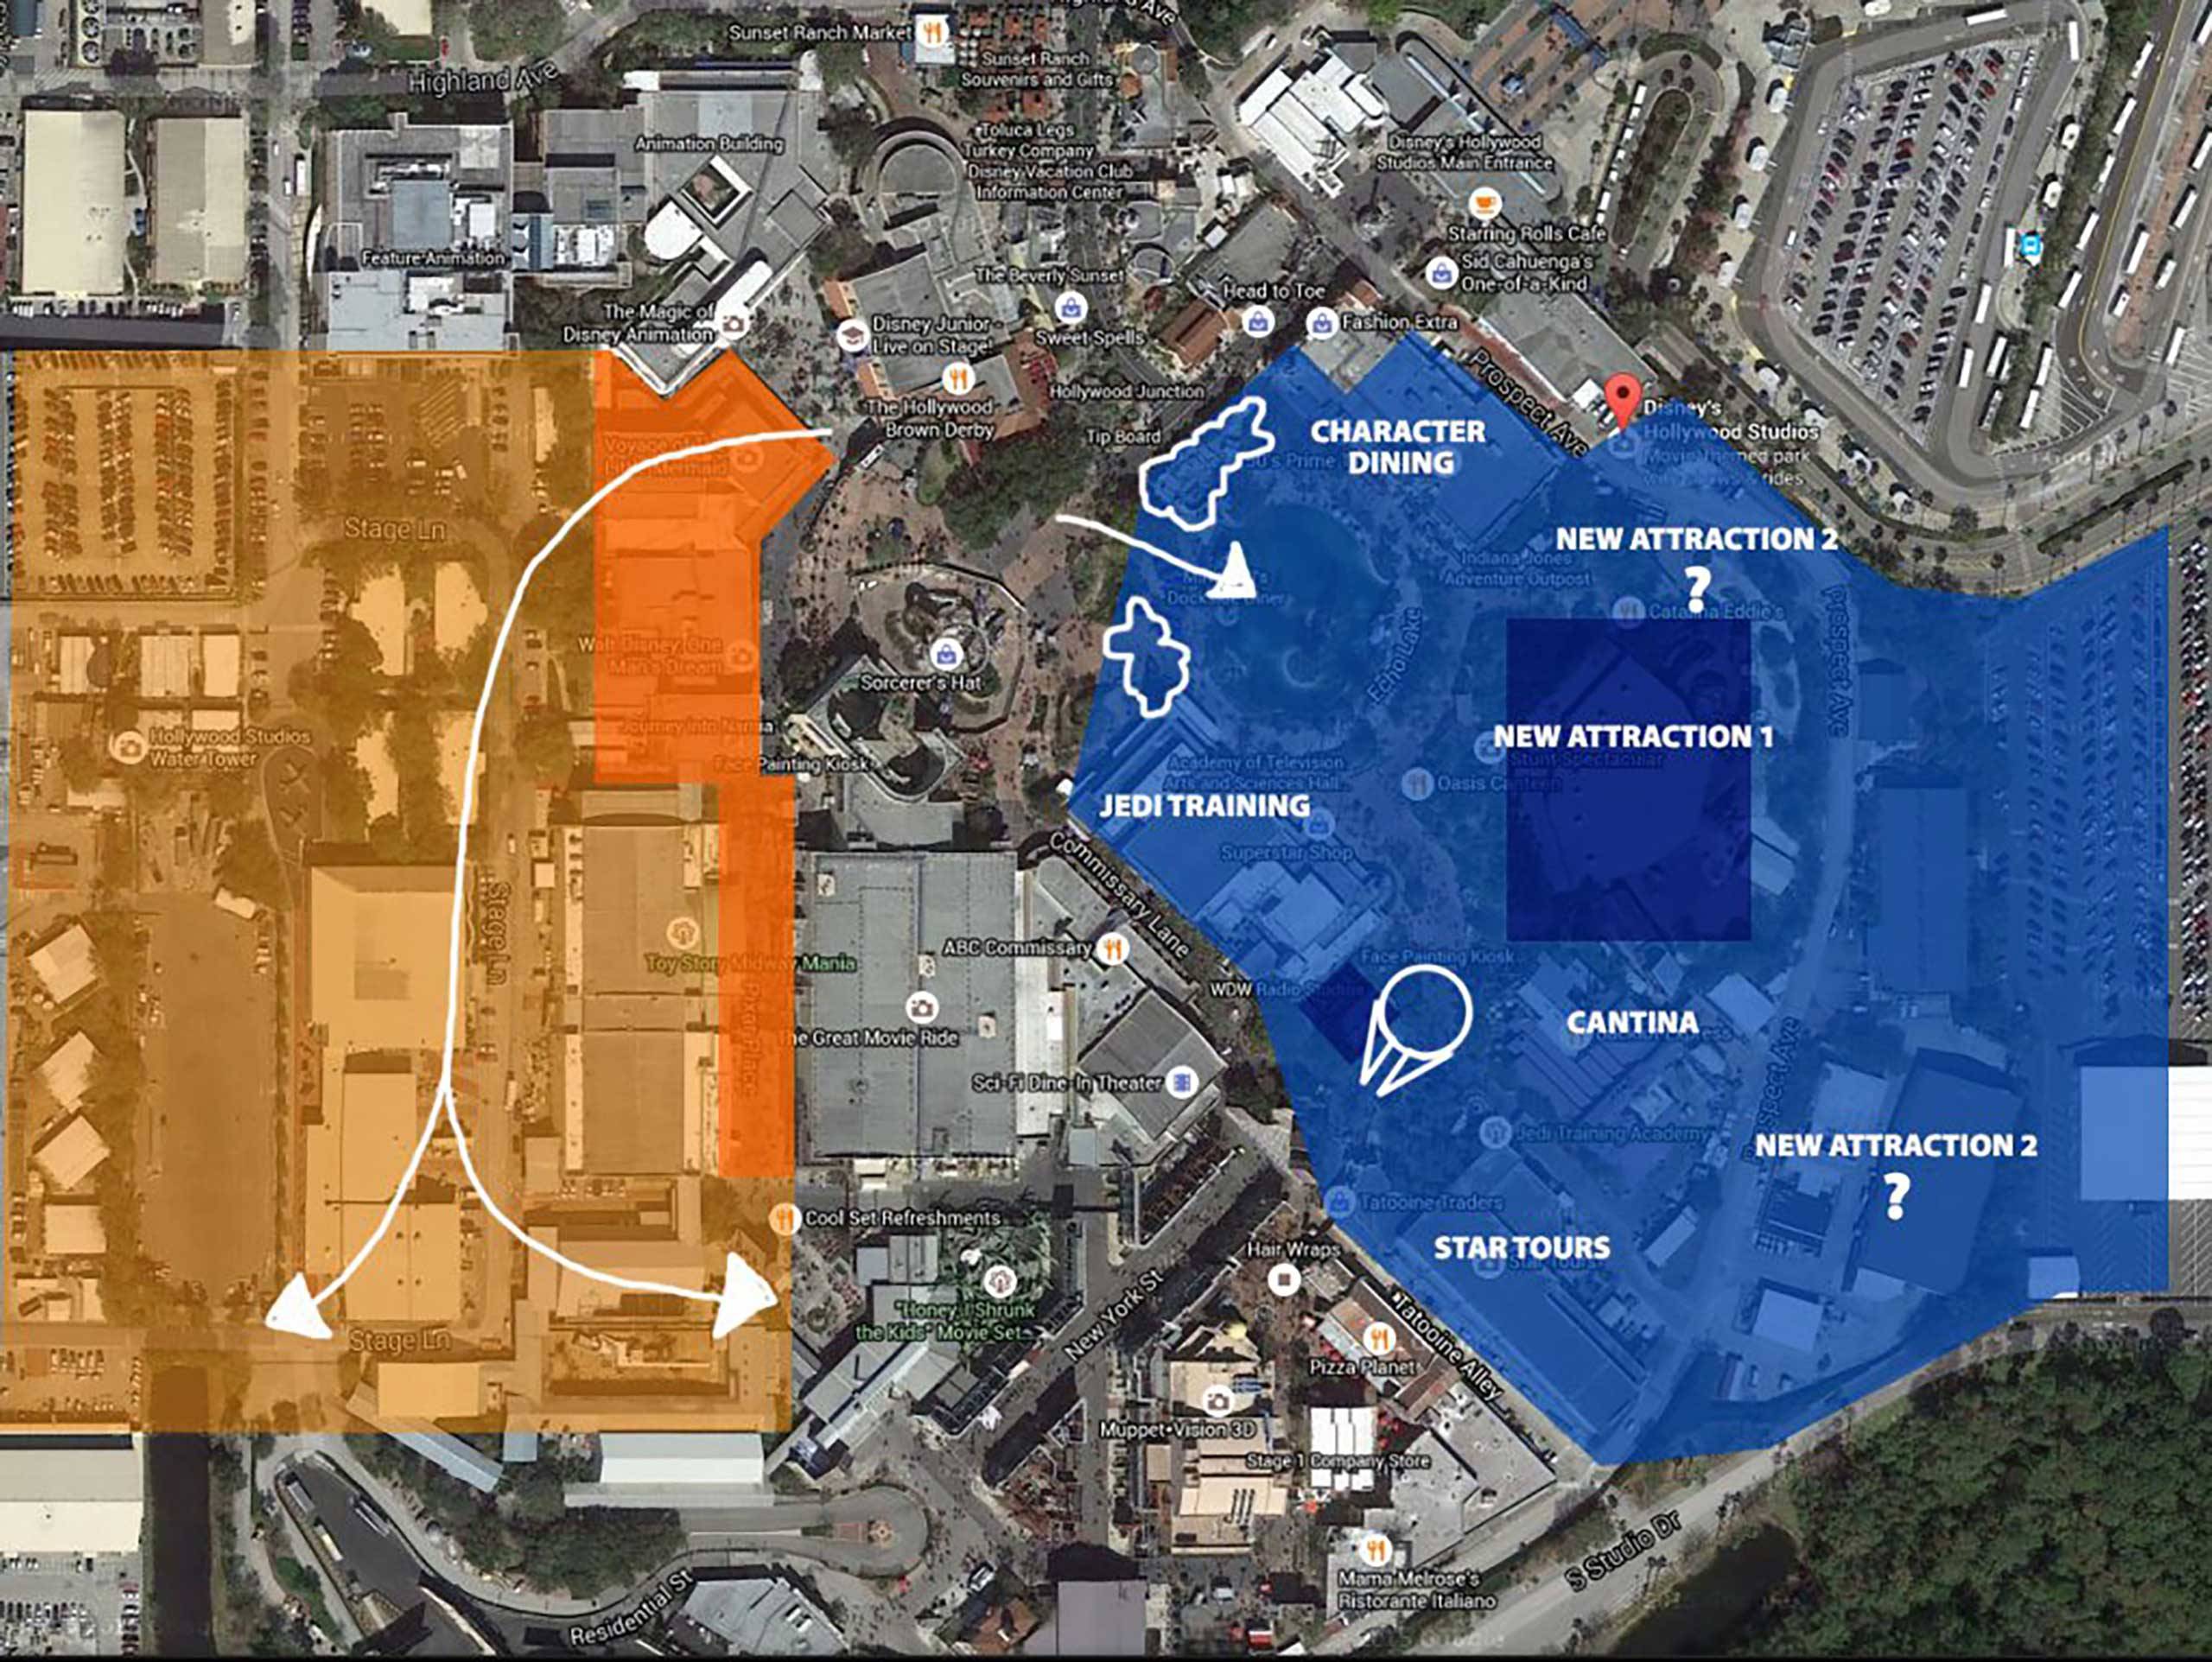 Planned location of Star Wars Land from early 2015. By Ignohippo.